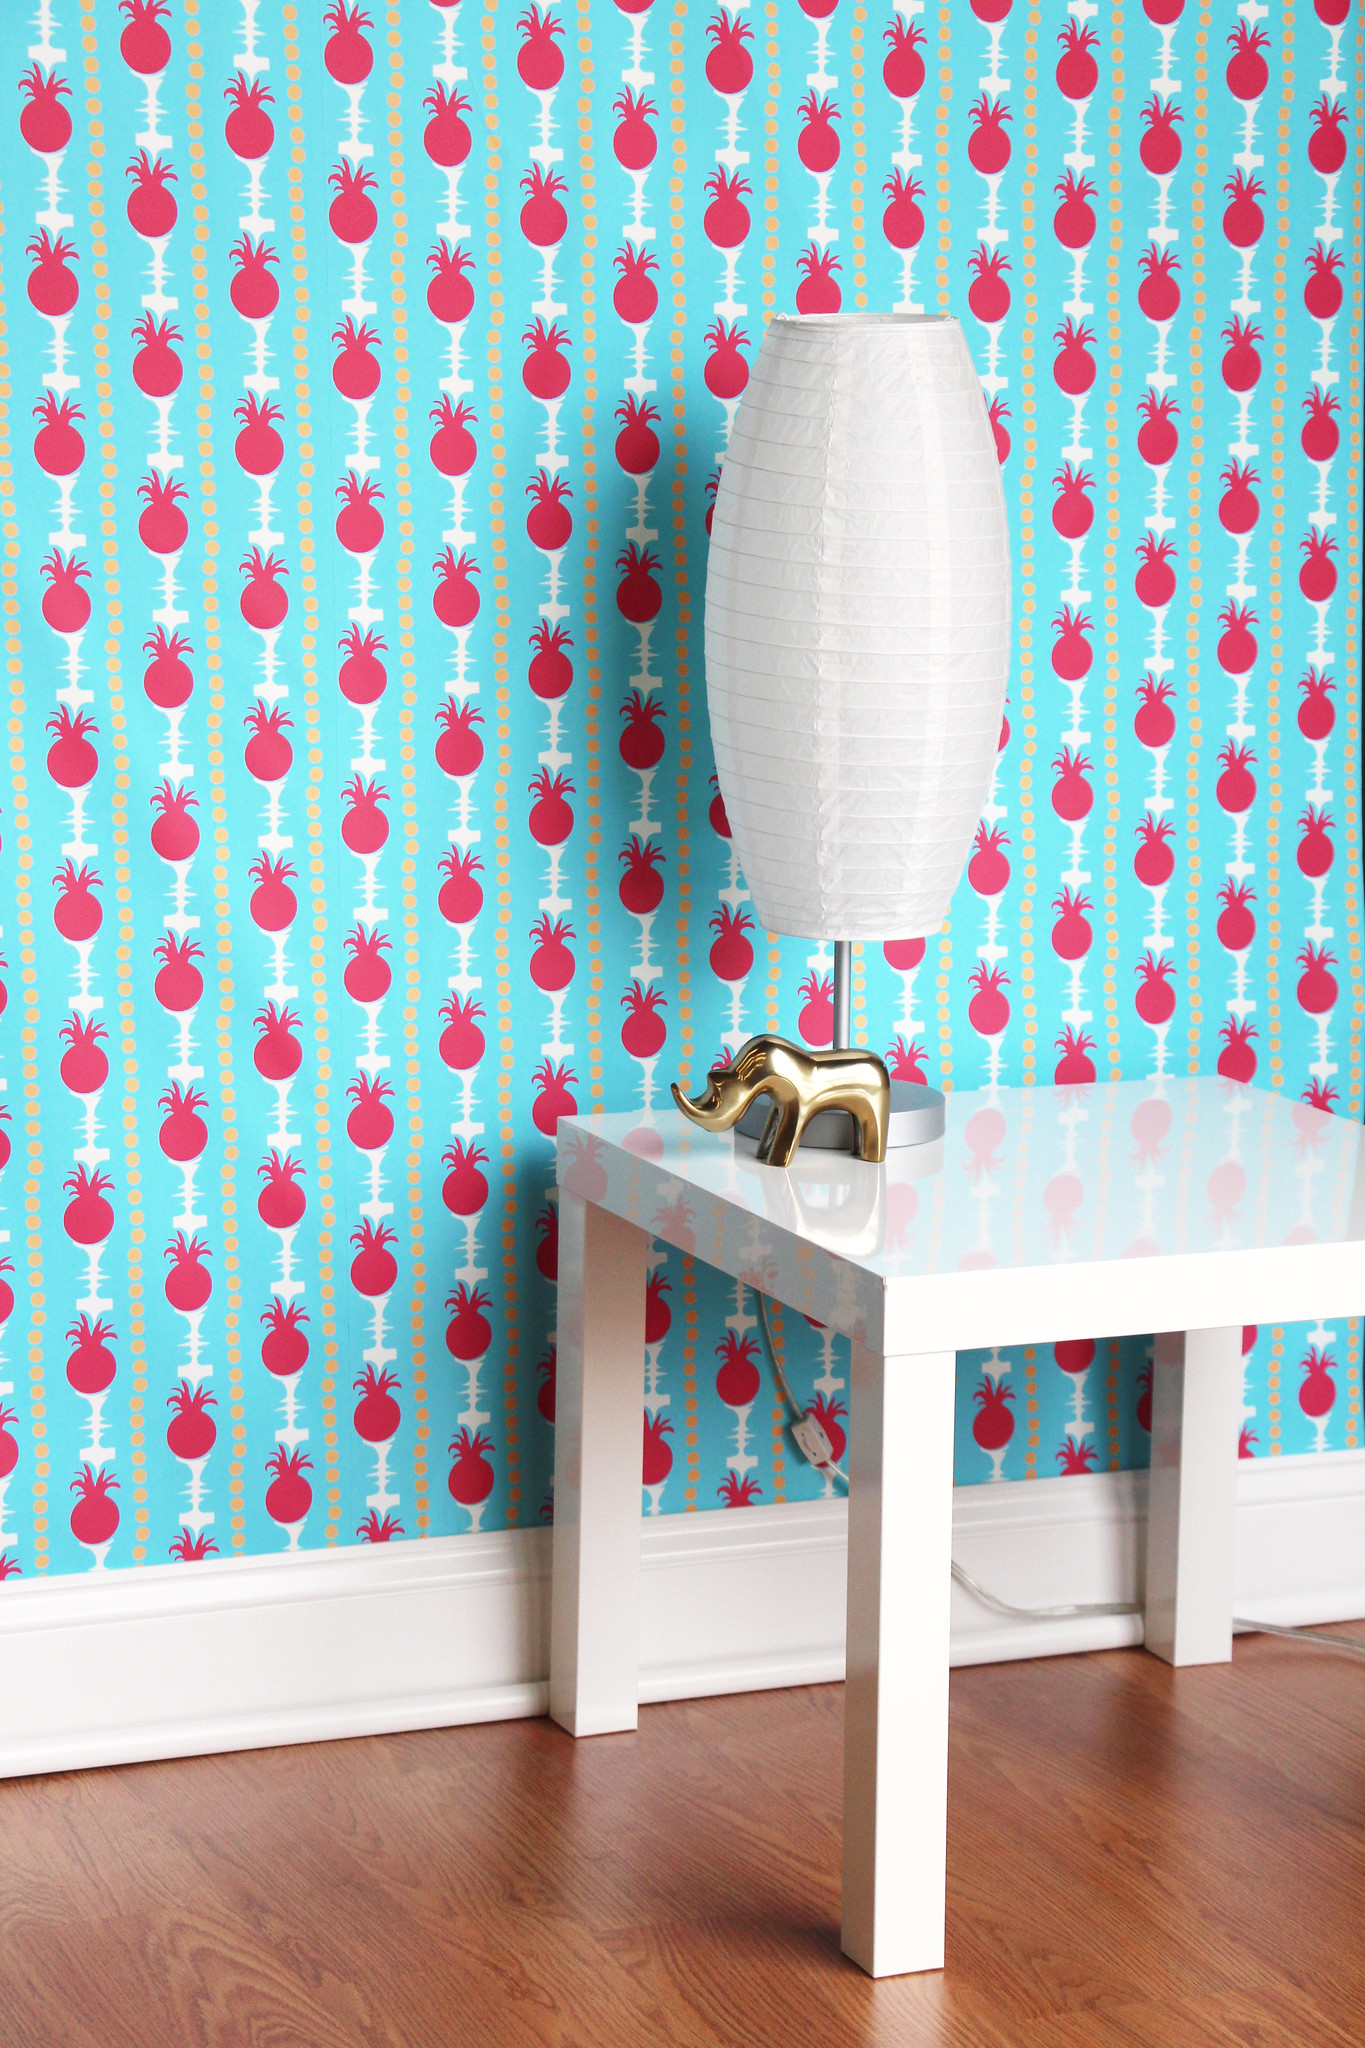 Install Removable Wallpaper